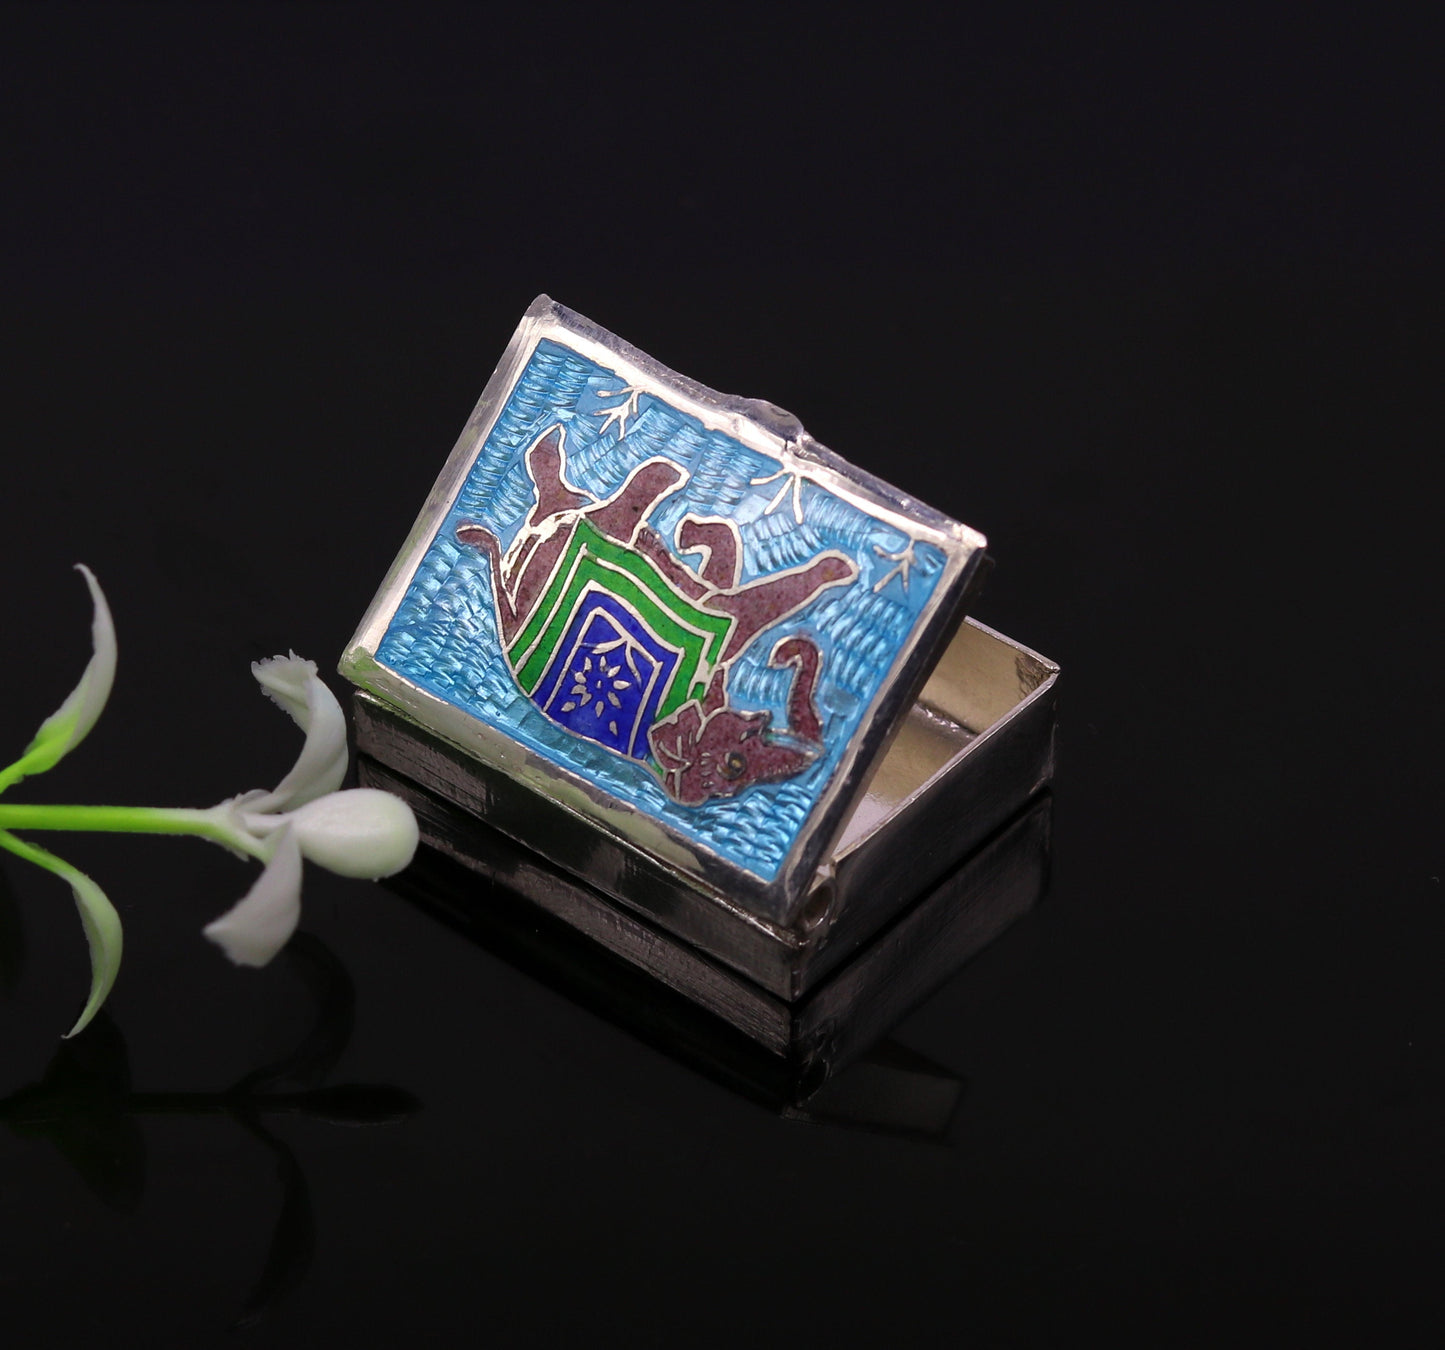 925 sterling silver handmade gorgeous rectangle shape elephant enamel work trinket box, casket box, container box, silver article stb14 - TRIBAL ORNAMENTS